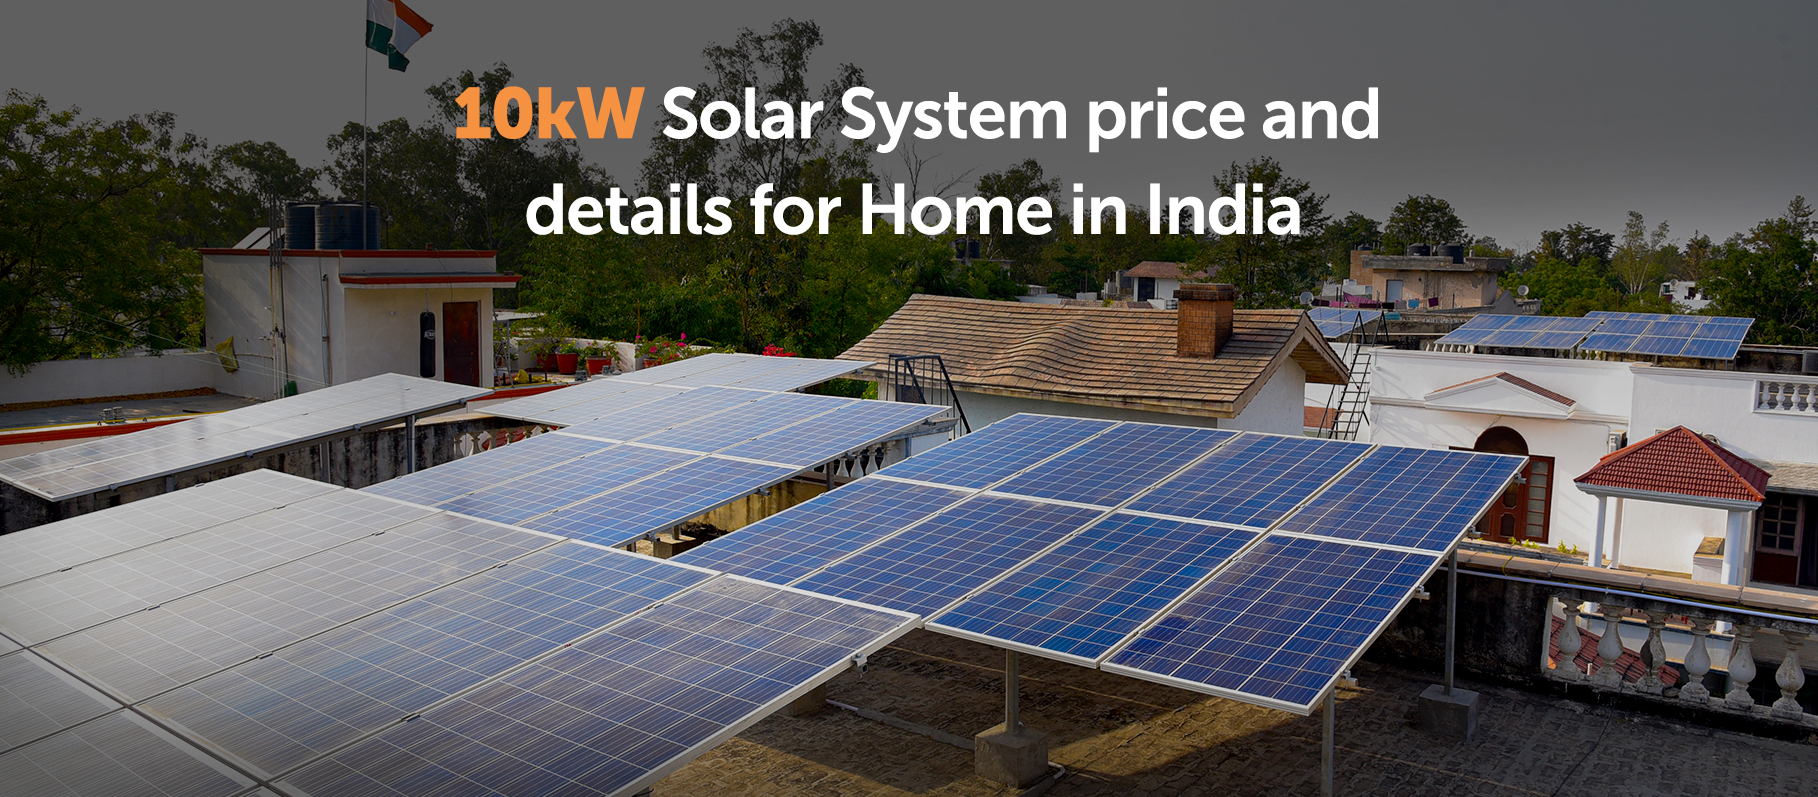 10kW Solar System Price And Details For Home In India